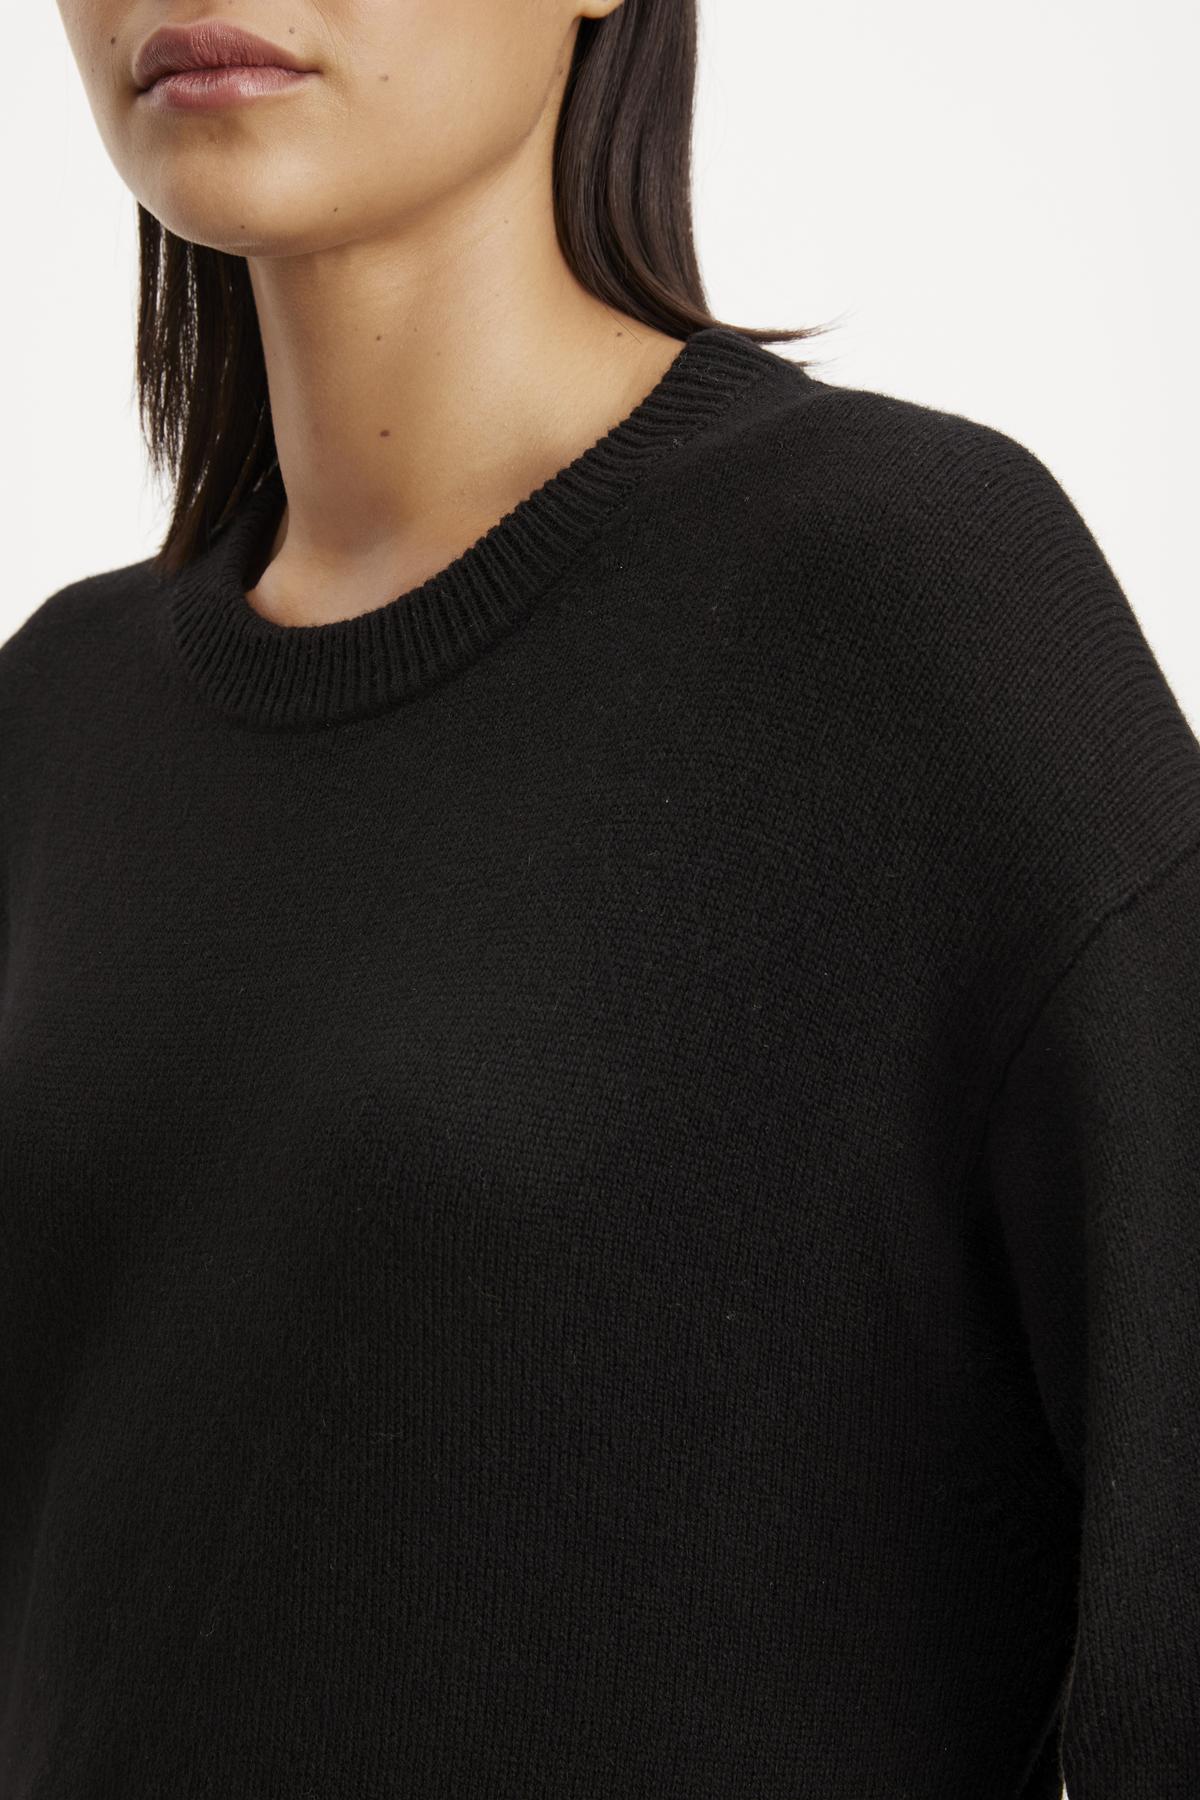 Close-up of a woman wearing a black ribbed Kaden sweater dress by Velvet by Graham & Spencer, focusing on the crew neckline and upper chest area.-35654462668993